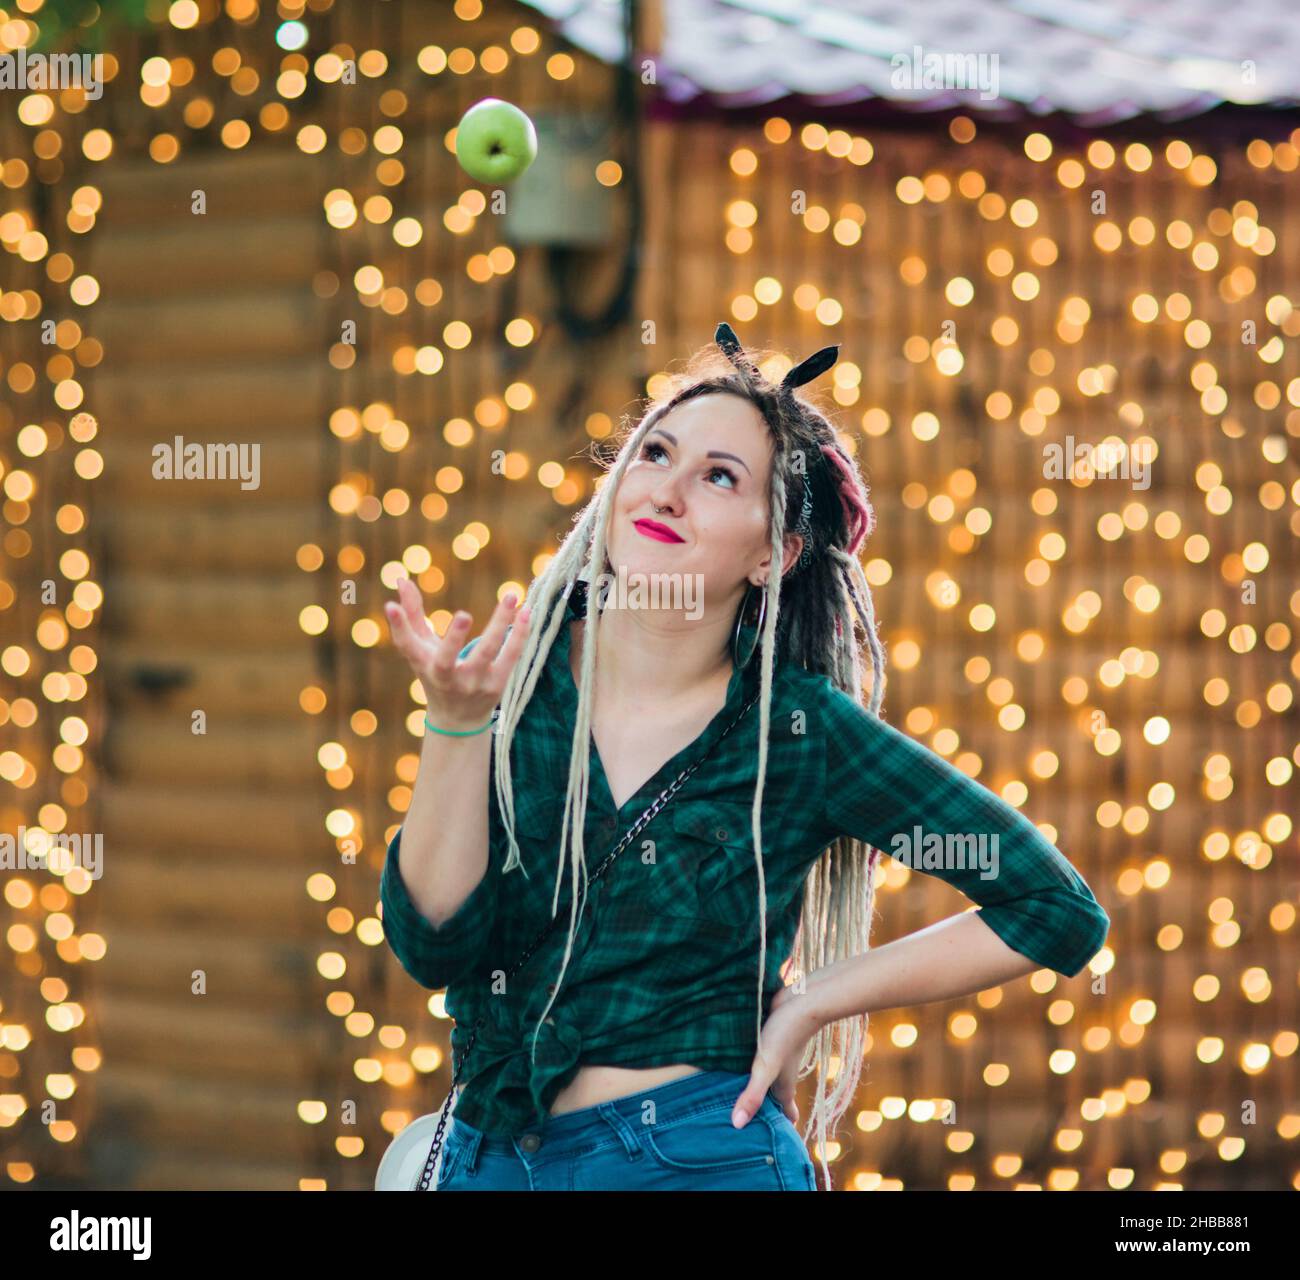 Inordinate young woman with dreadlocks hairstyle and fashionable summer clothes throws an apple against the background of garlands Stock Photo